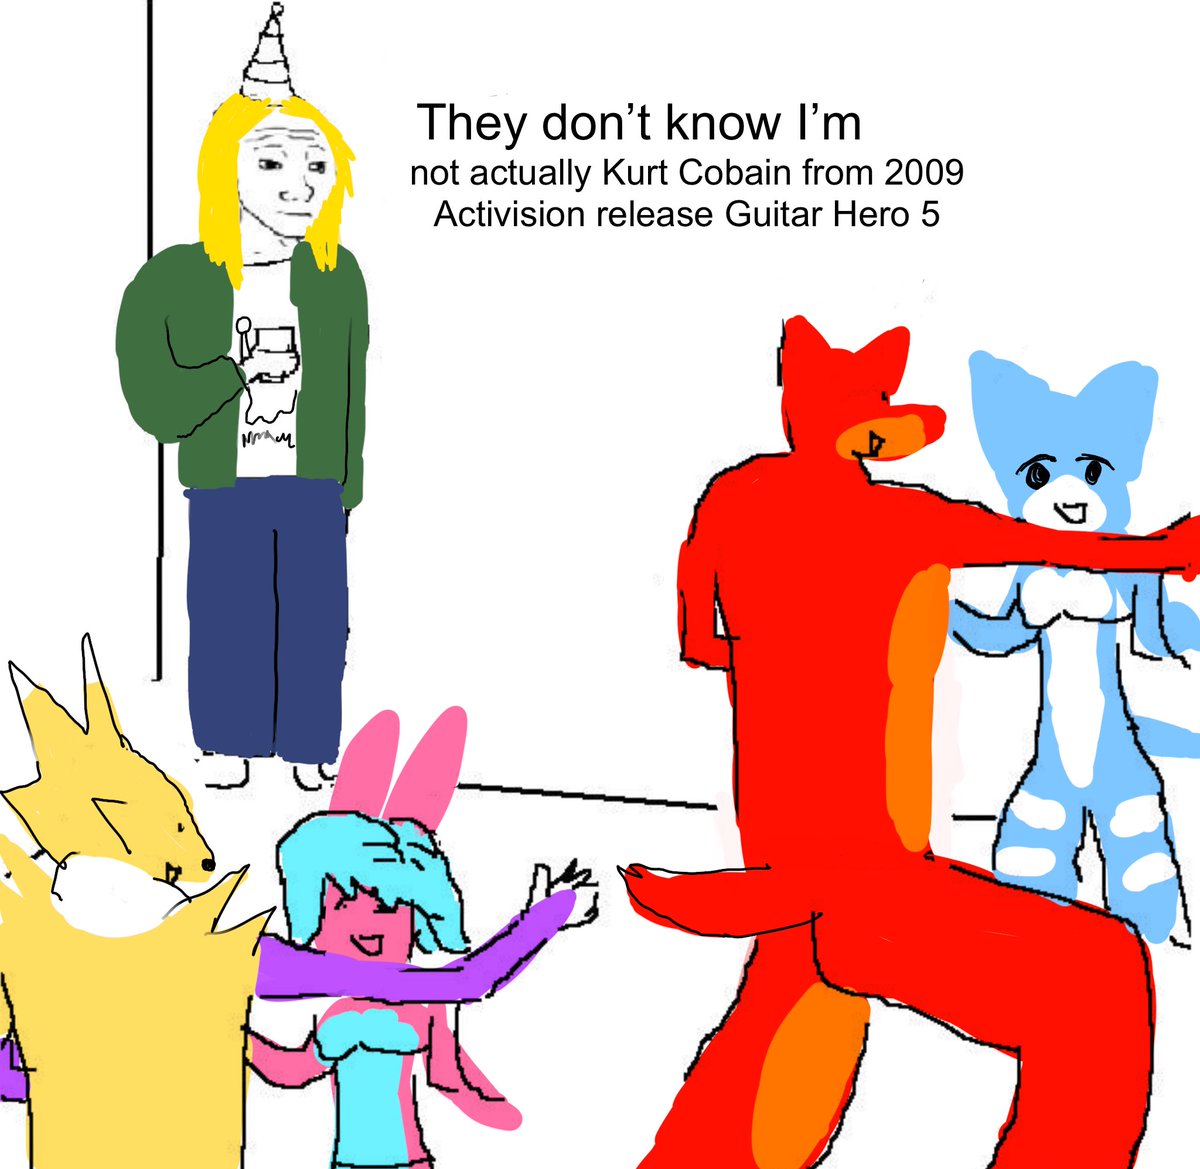 they dont know im wojak meme twitter - cartoon - They don't know I'm not actually Kurt Cobain from 2009 Activision release Guitar Hero 5 .